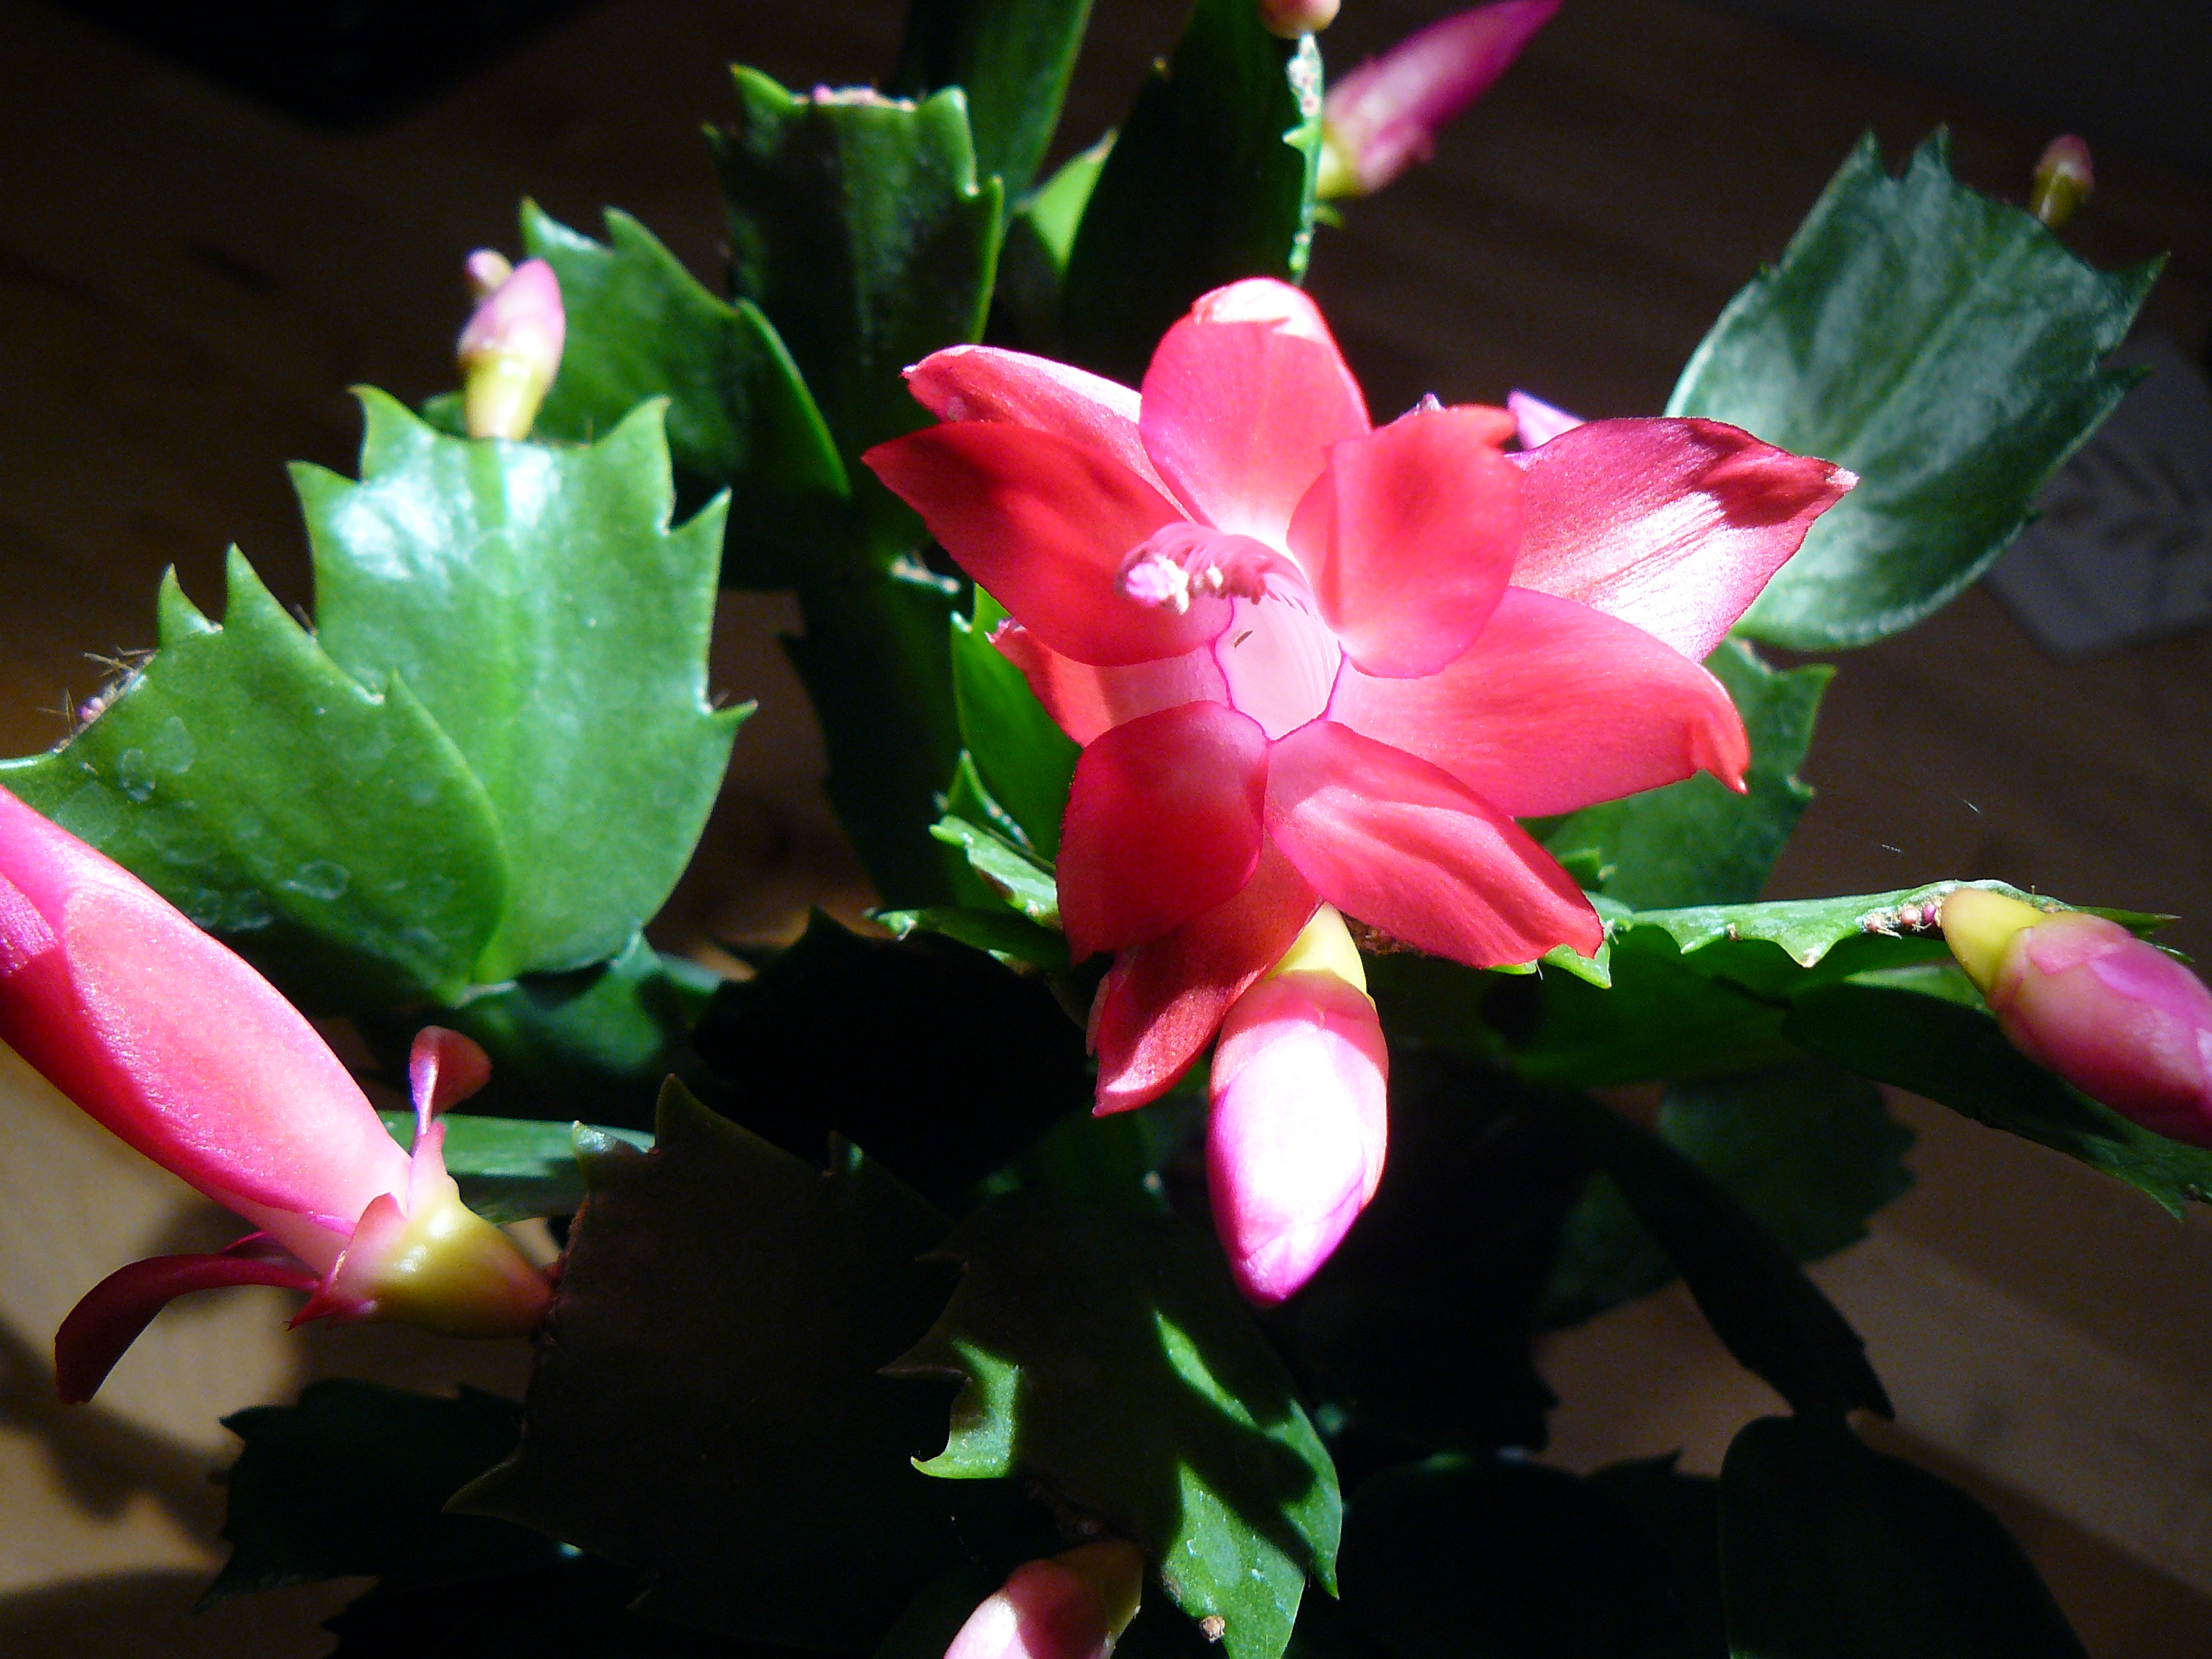 Holiday cacti: Cristmas cactus, Thanksgiving cactus, and Easter cactus